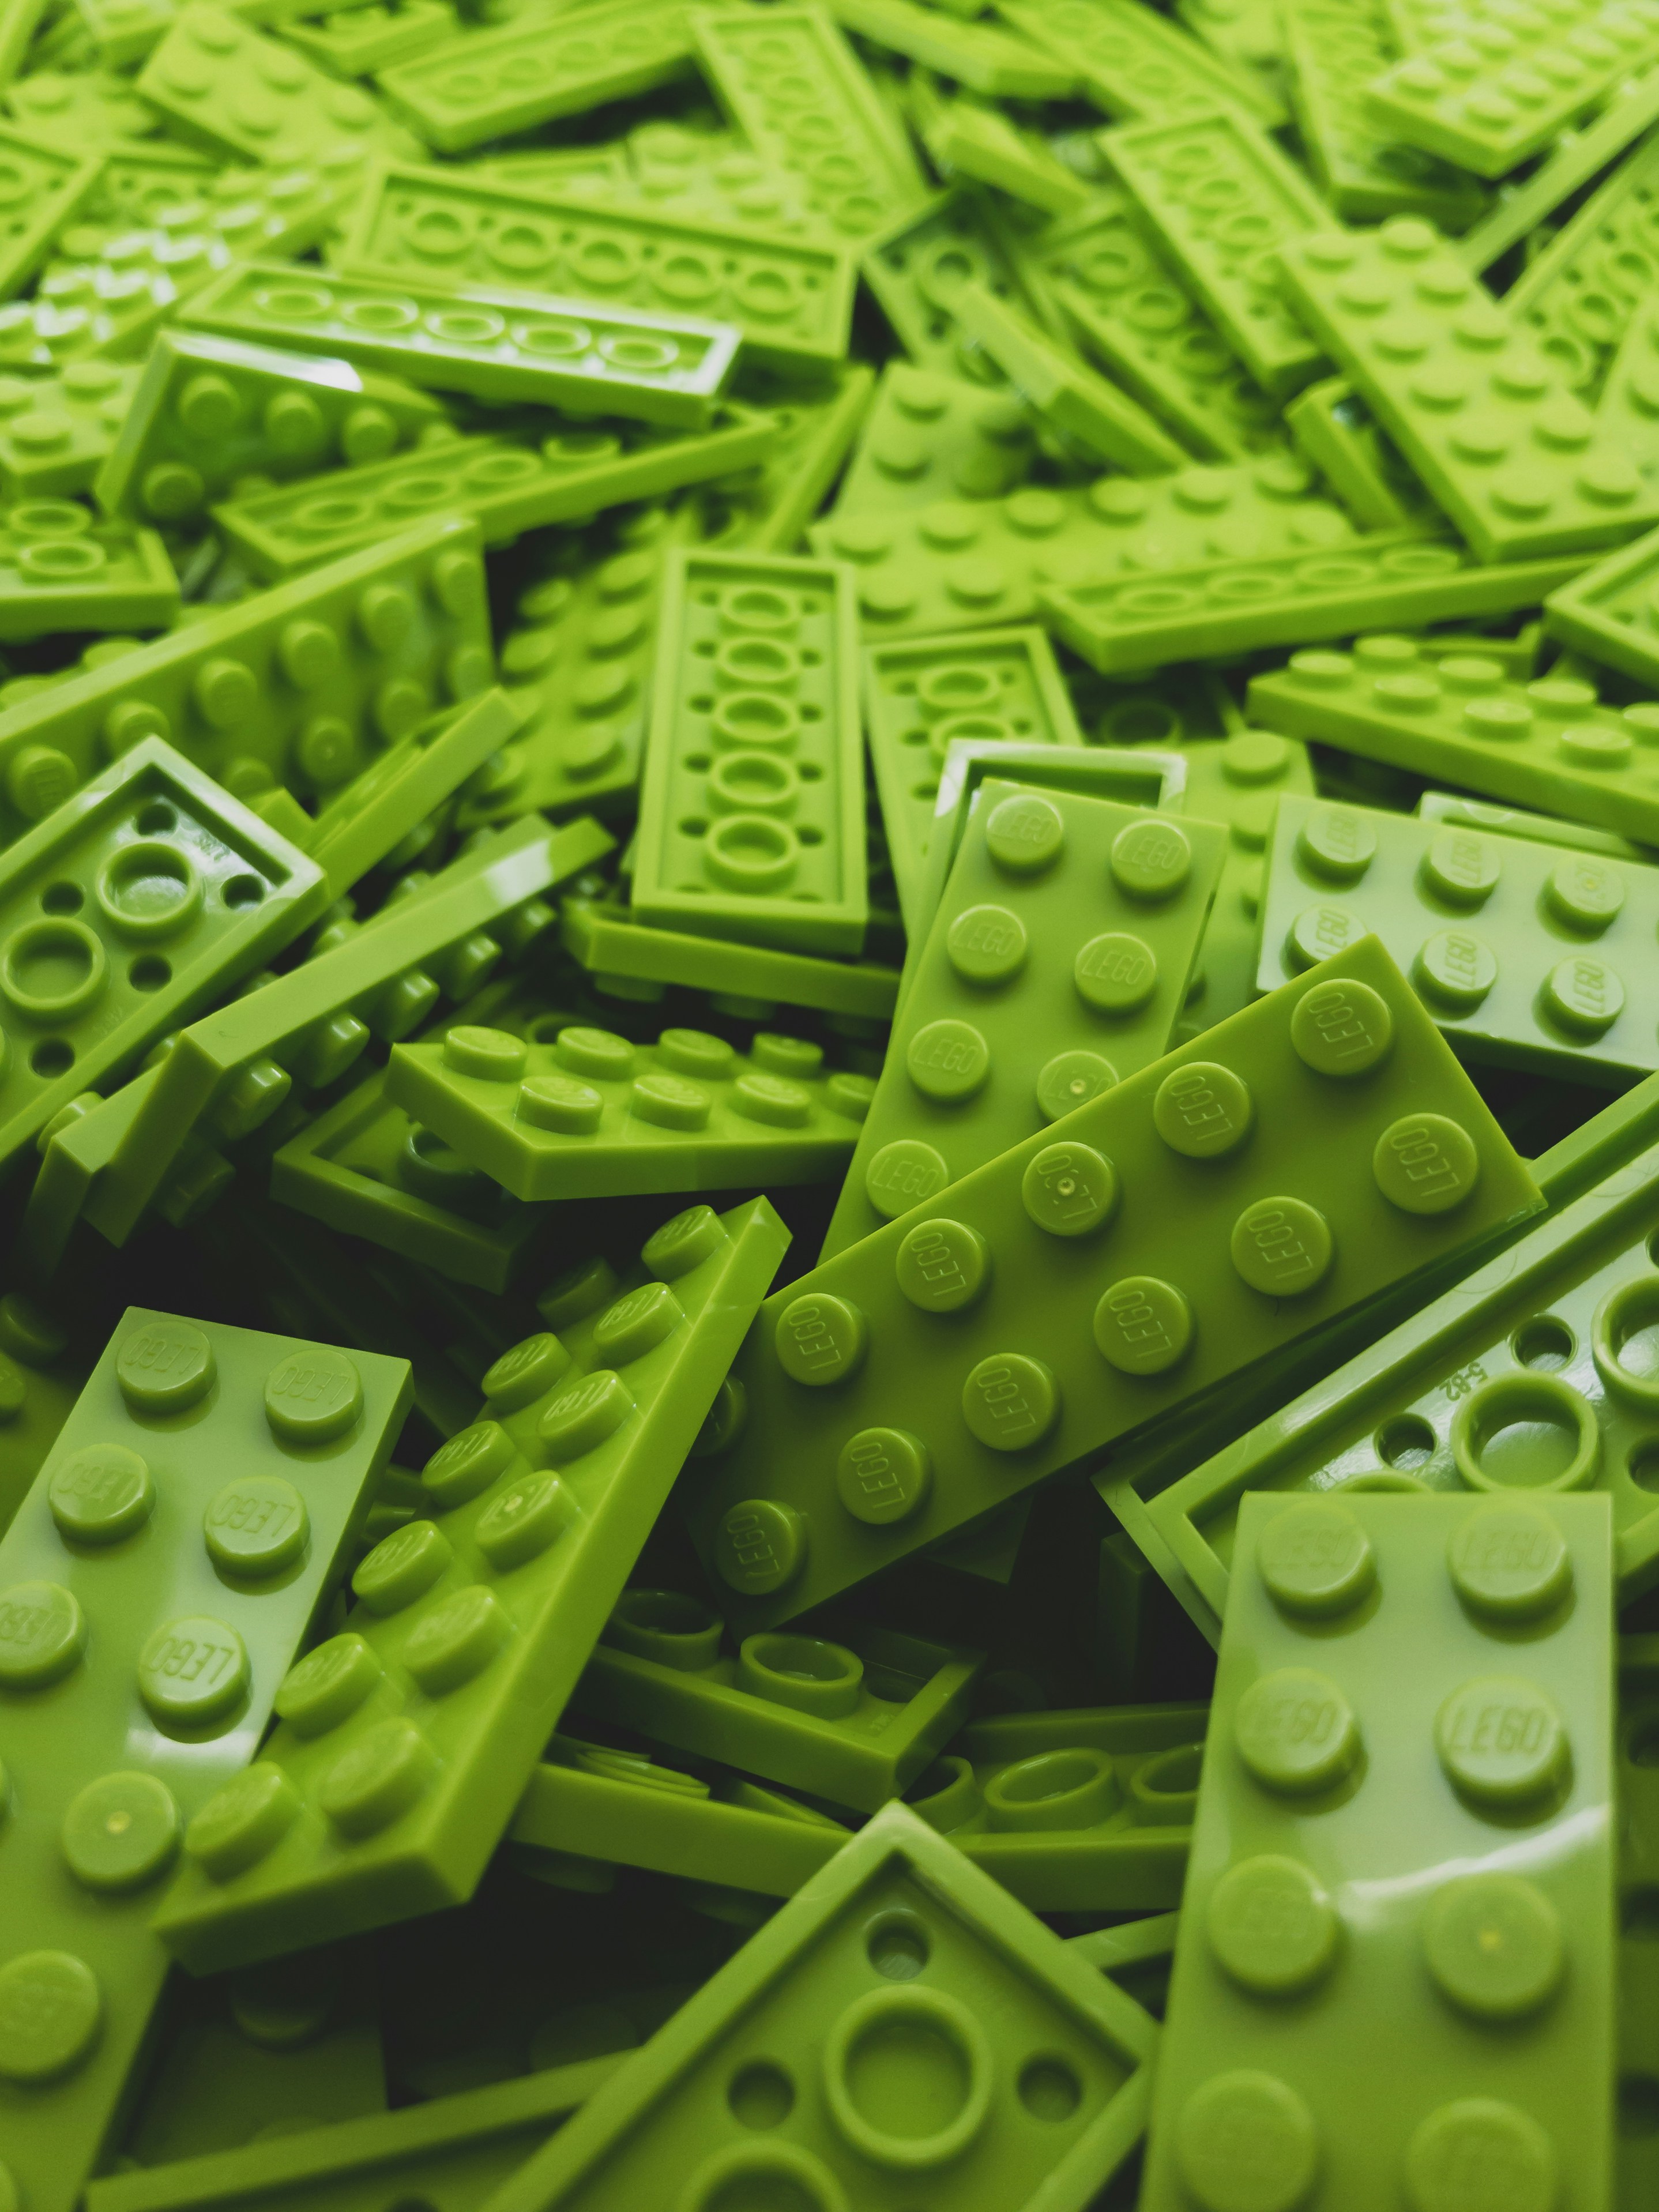 A sea of green Lego. Who doesn't feel happy with that?